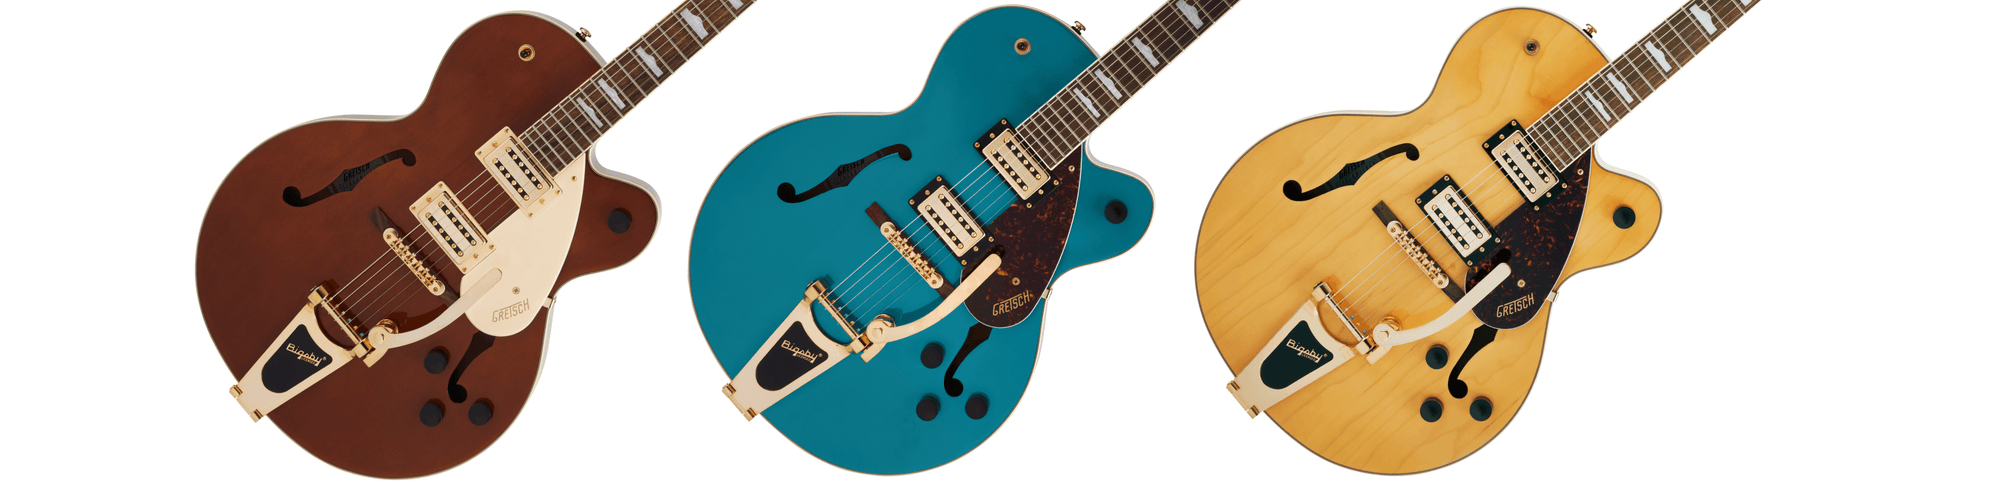 Gretsch drop exciting new Streamliner Hollow Body model, the G2410TG.-Sky Music